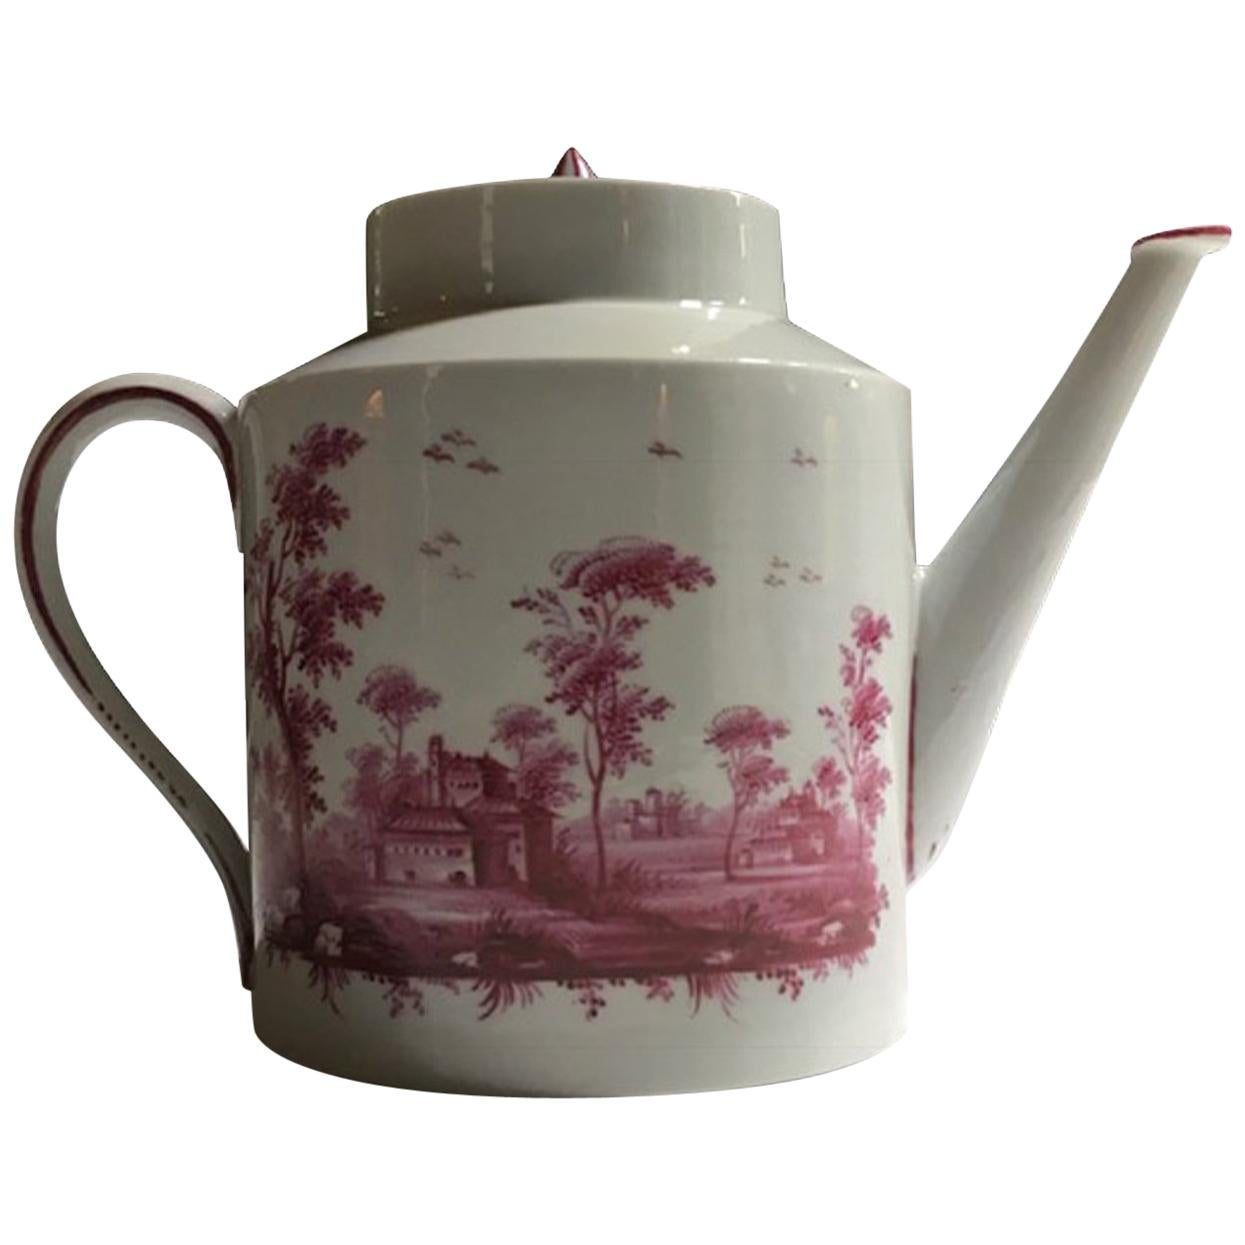 Richard Ginori Late 18th Century Porcelain Tea Pot with Hand Painted Landscapes